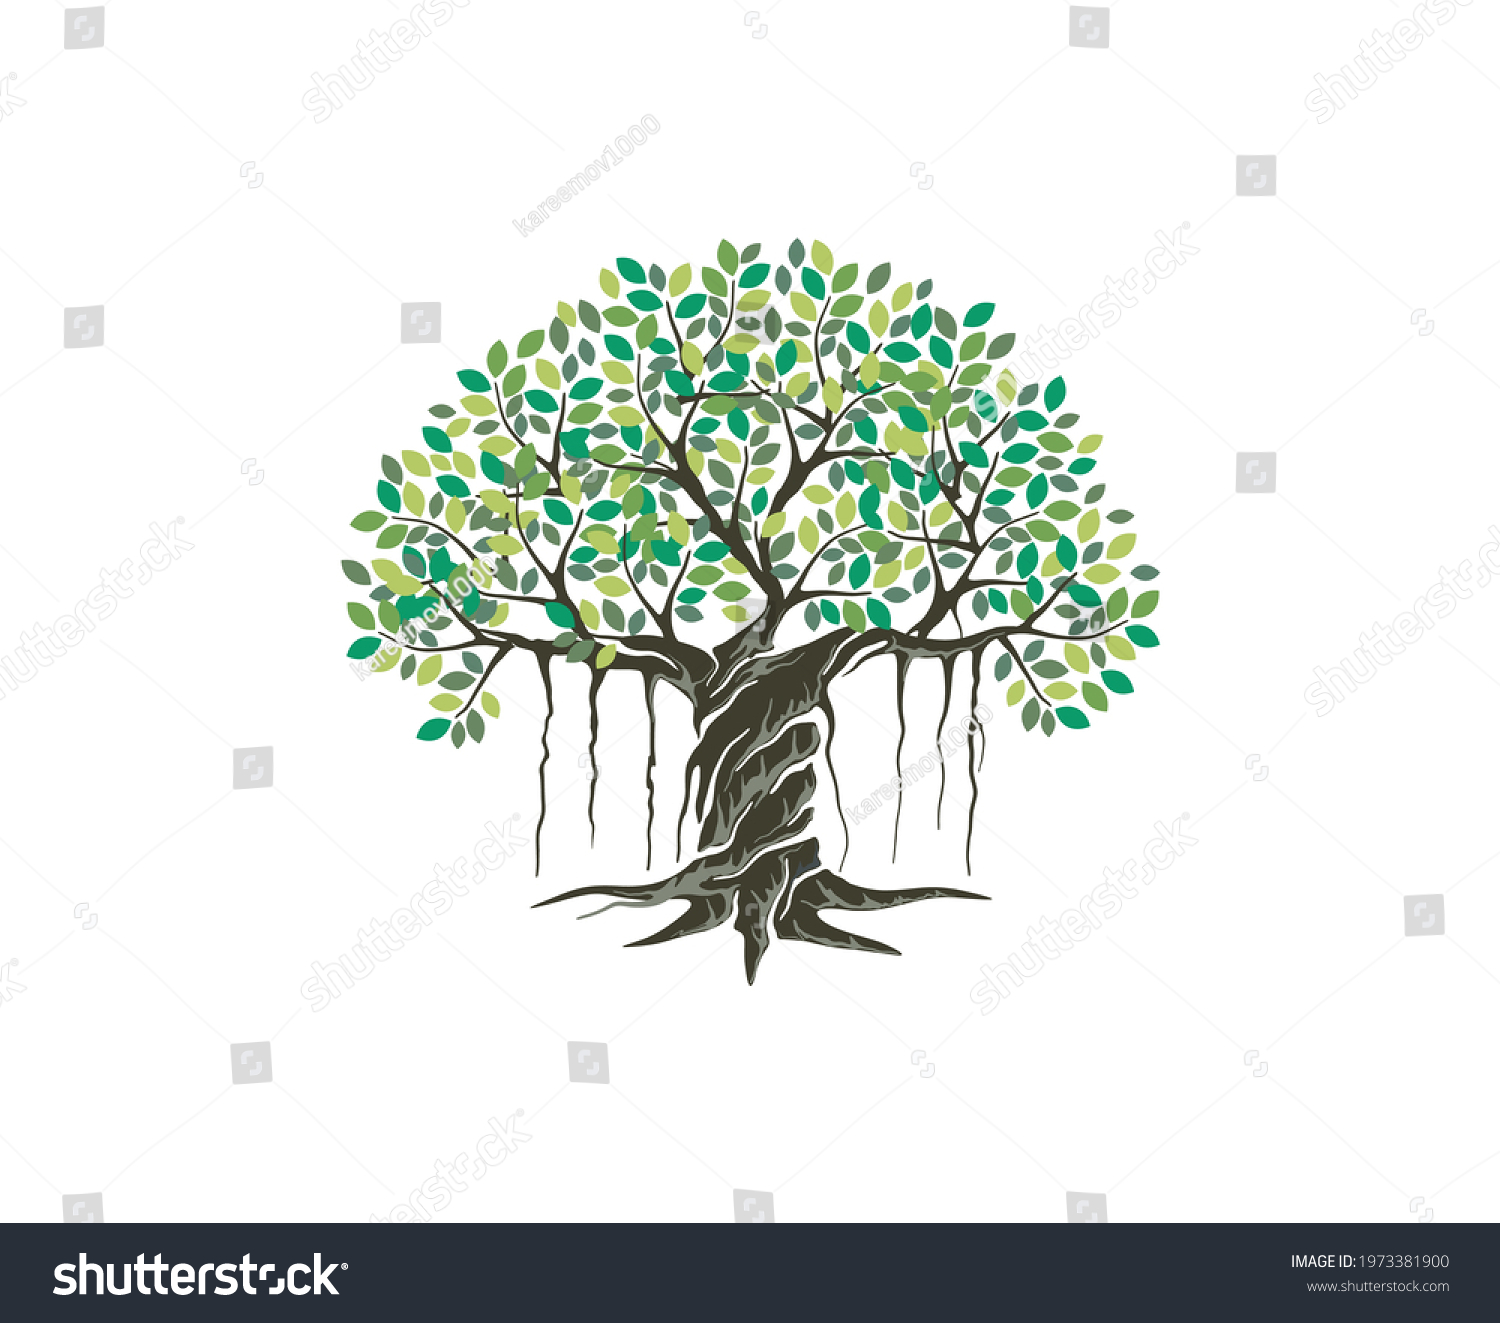 SVG of Decorative banyan tree with hand drawn style, vector isolated on white svg